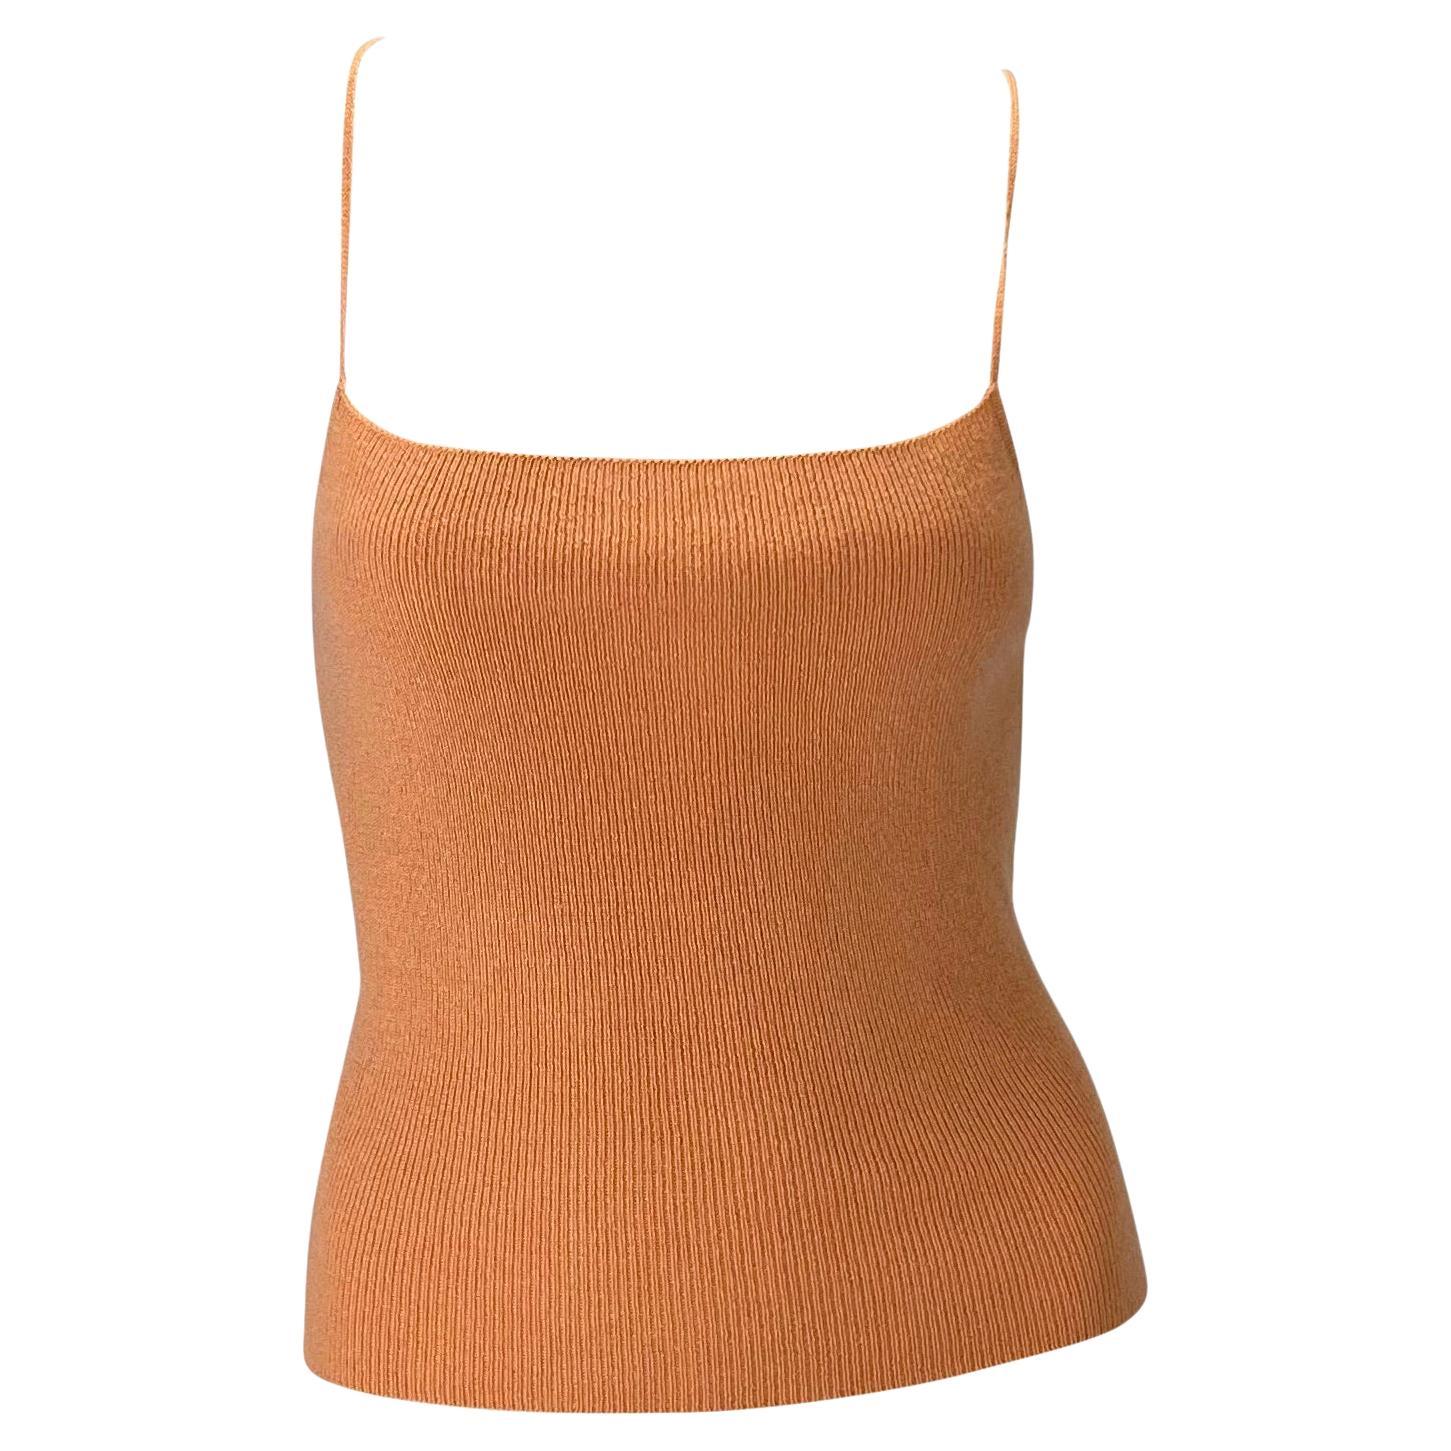 Presenting a peach-colored knit lace-up Gucci sweater top, designed by Tom Ford. From the mid-1990s, this knit tank top features a square neckline, spaghetti straps, and a lace-up back. An unusual piece of Gucci, this stretchy top has the perfect